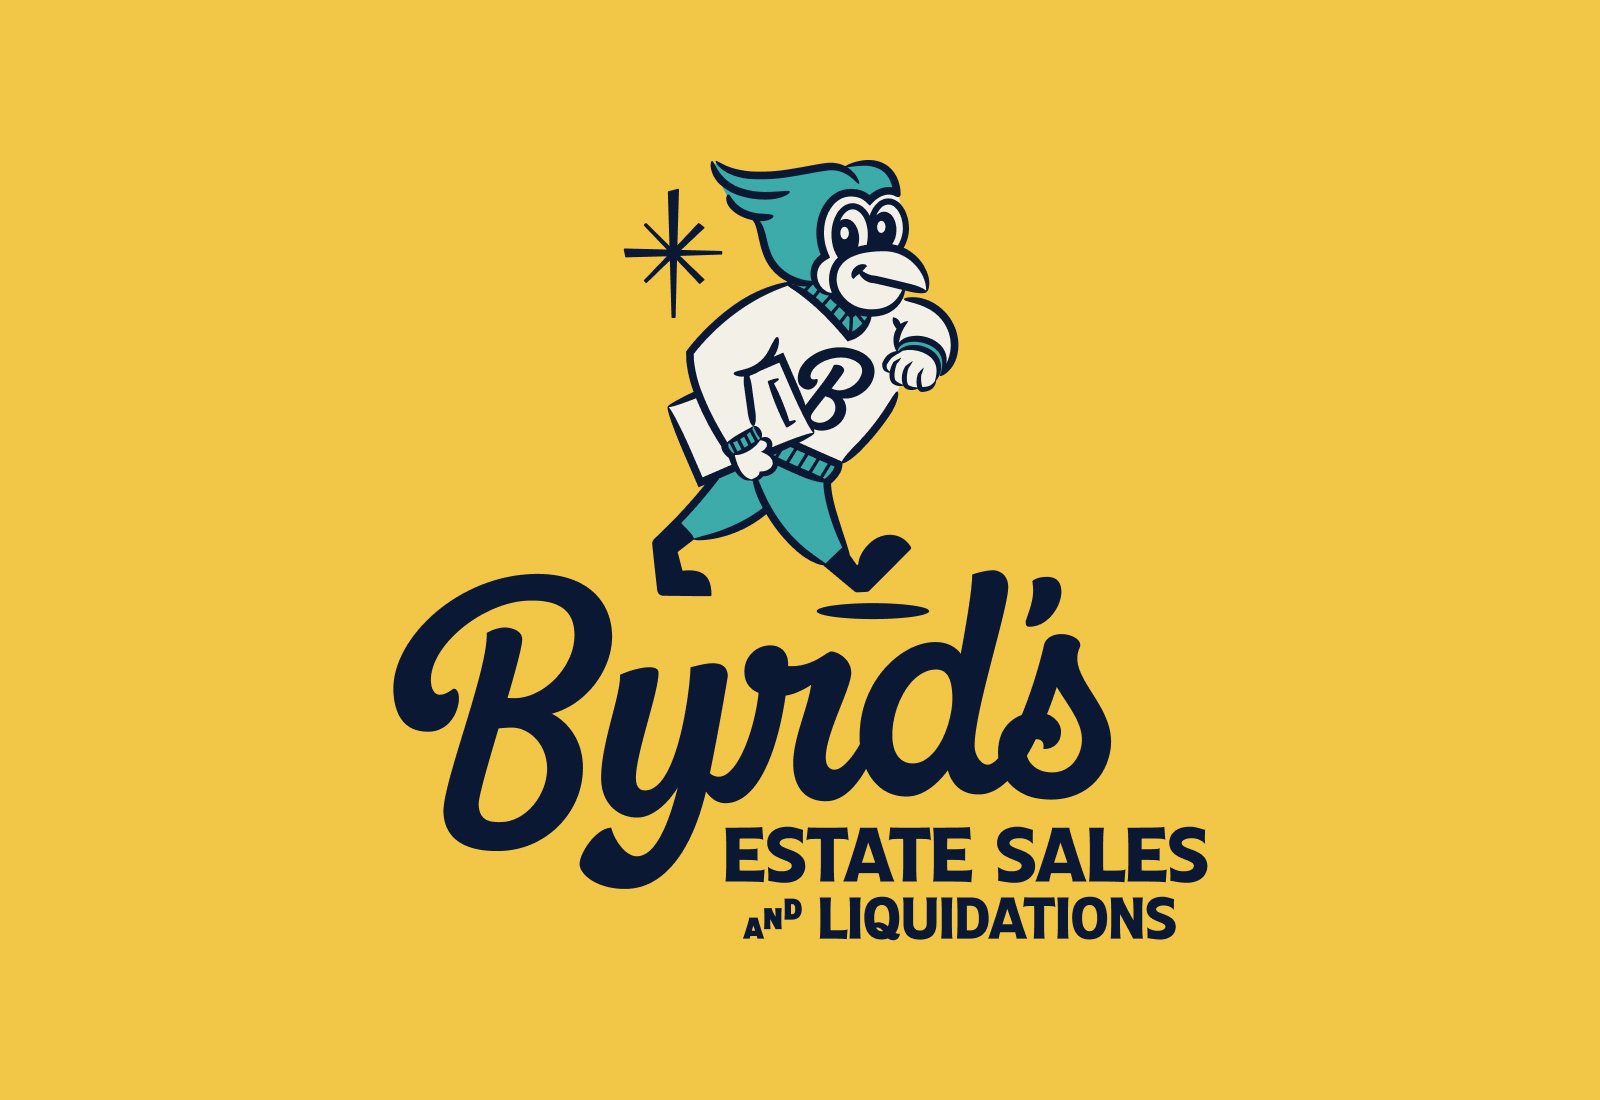 Hand Lettered Script Logo and Bird Mascot Illustration | Byrd's Estate Sales and Liquidations | Brand Identity by Joey Carty